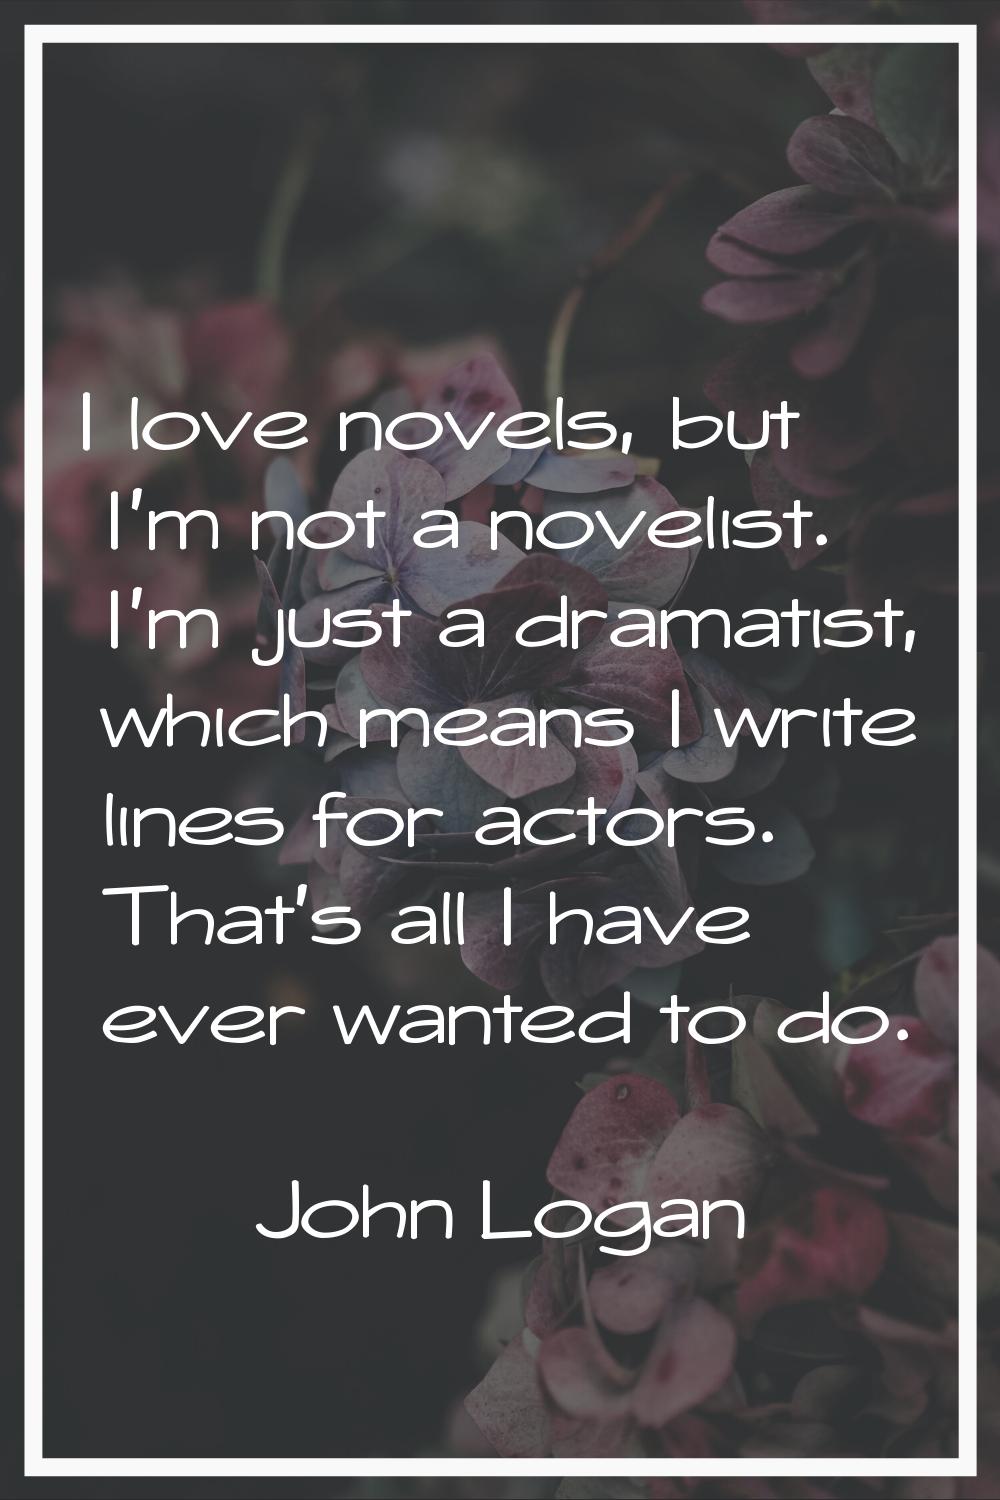 I love novels, but I'm not a novelist. I'm just a dramatist, which means I write lines for actors. 